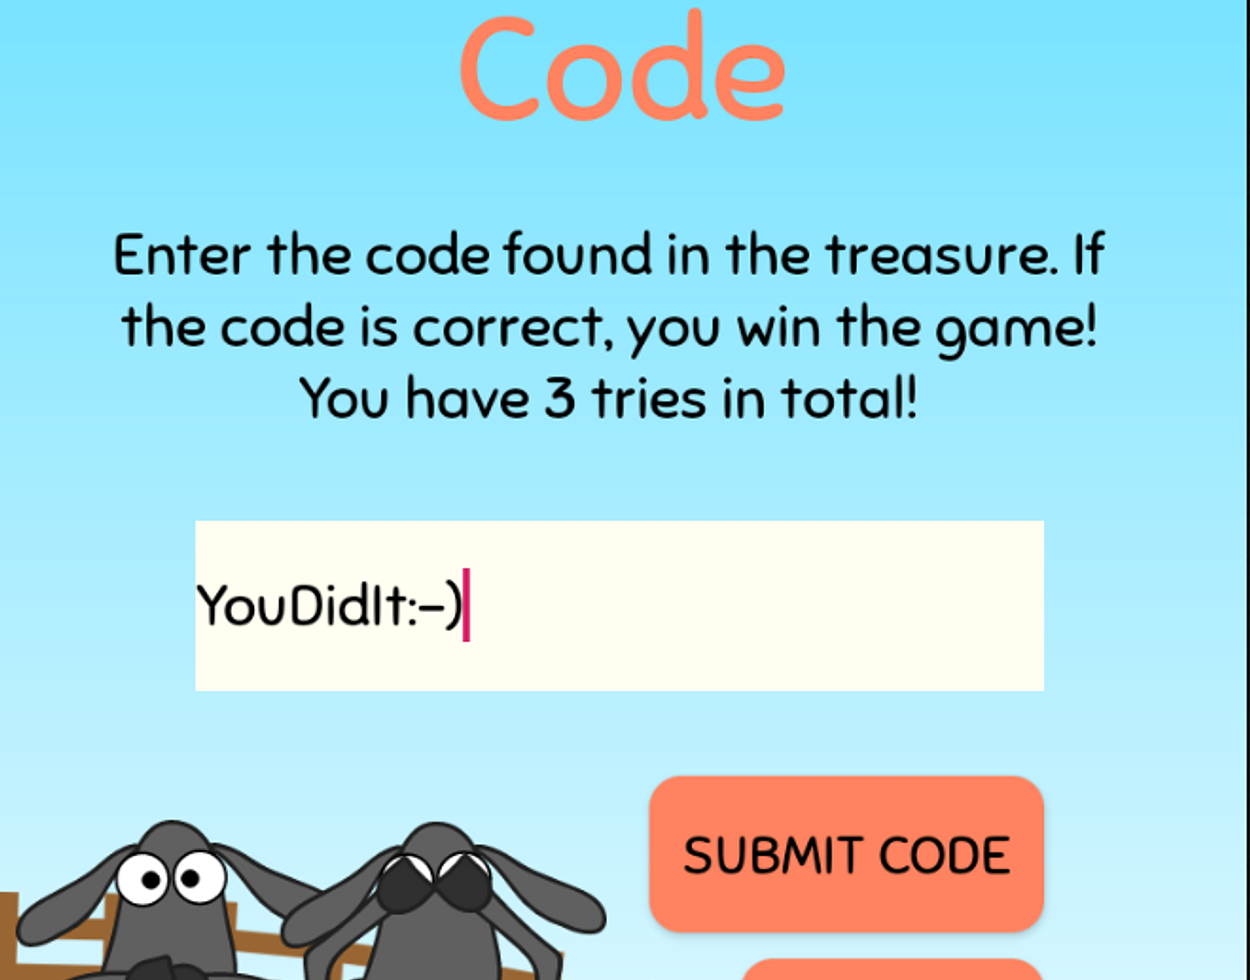 Once you find the treasure, enter the treasure code into the app to see if you have one. Be careful! You only have three tries to get the code right, or it's game over.